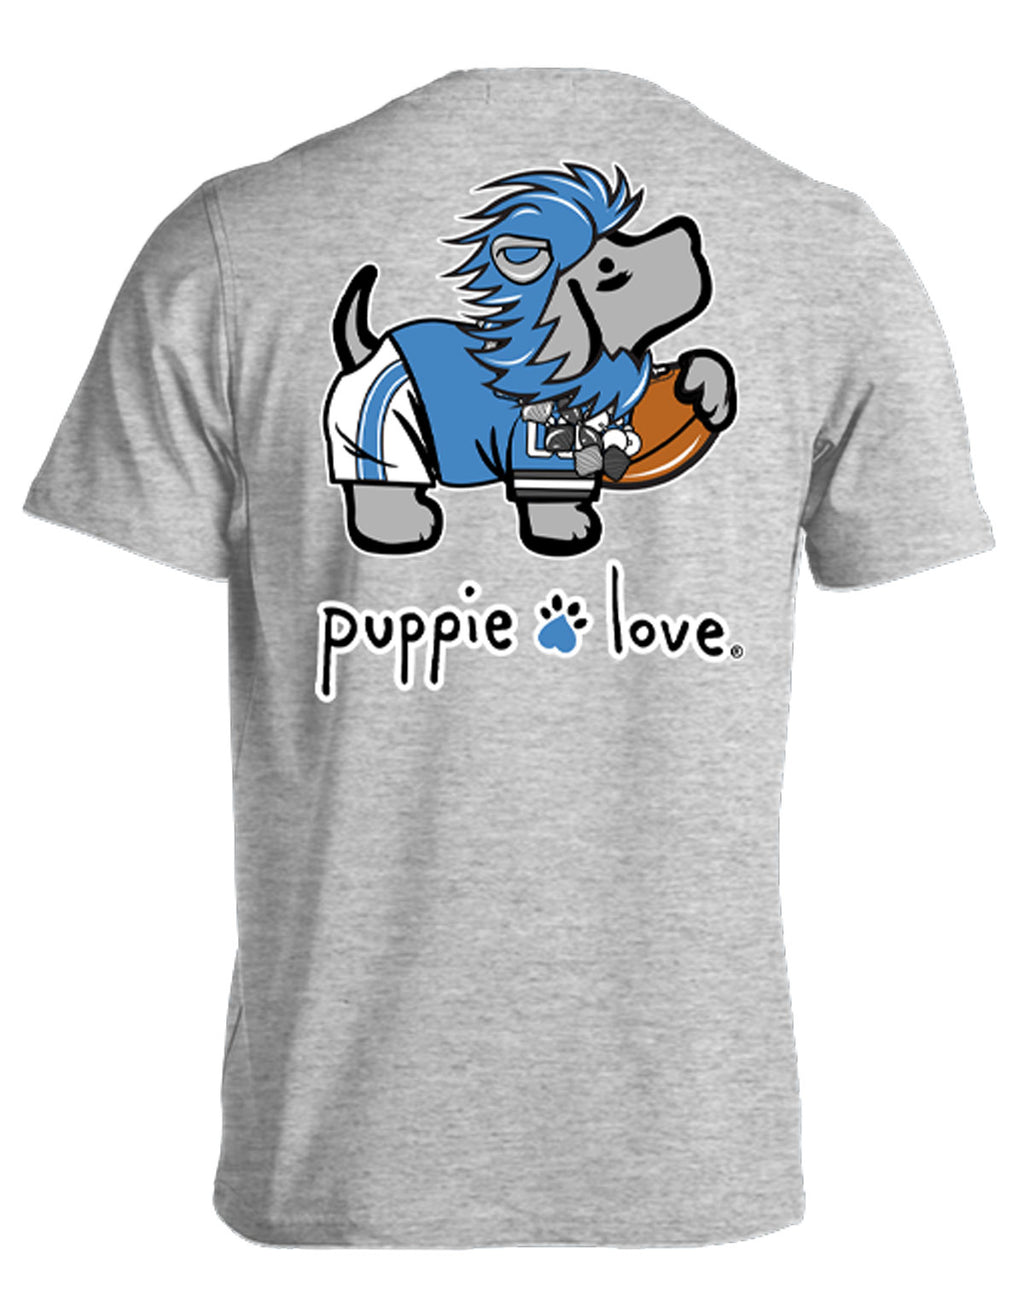 BLUE AND SILVER MASCOT PUP - Puppie Love